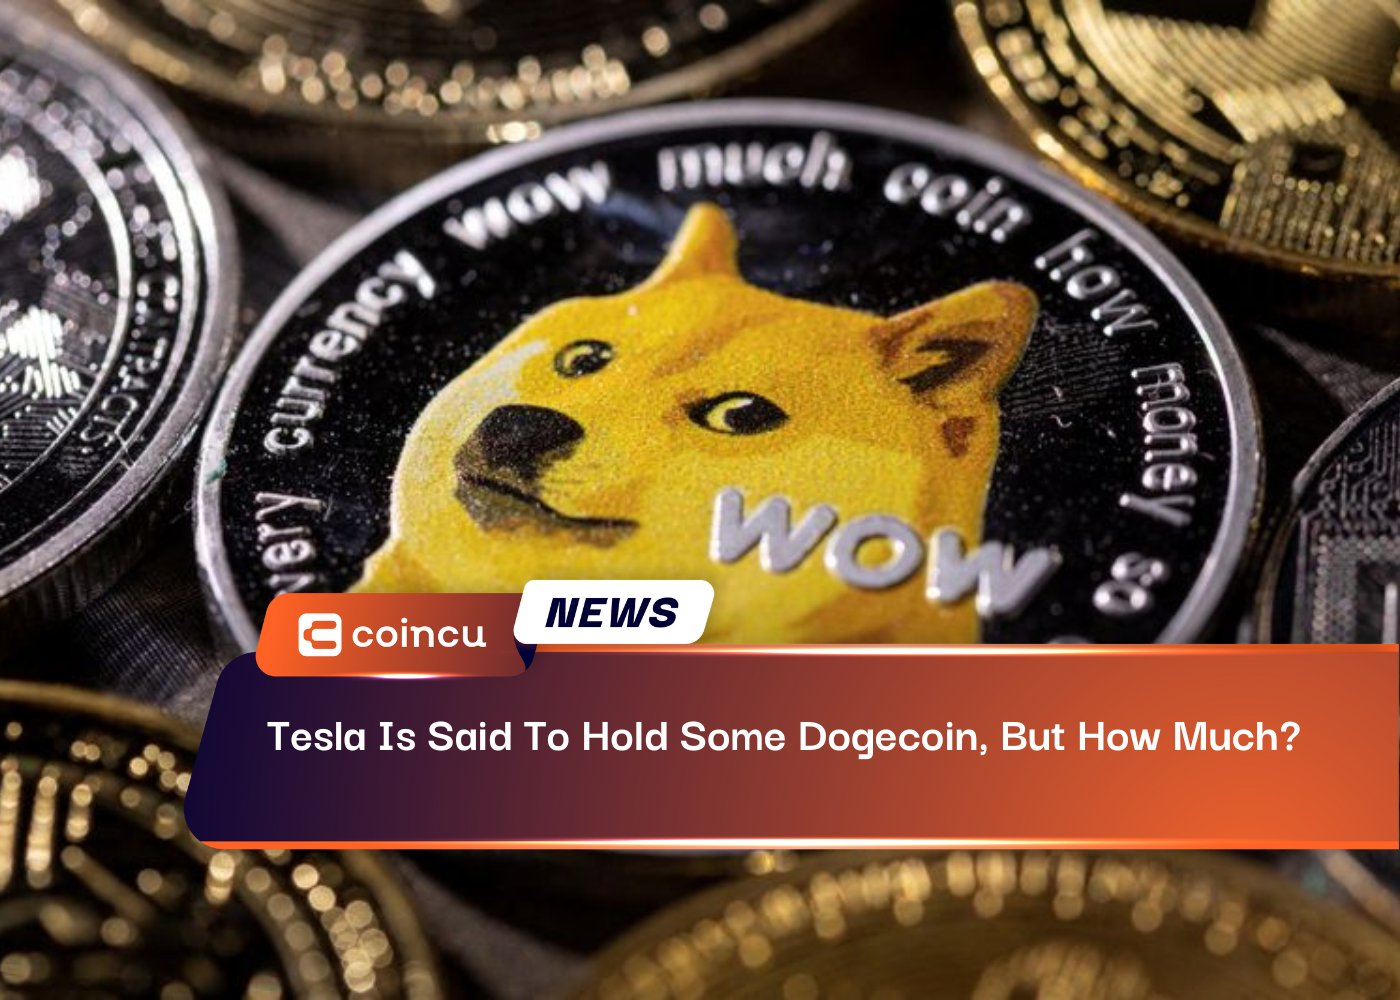 Tesla Is Said To Hold Some Dogecoin, But How Much?